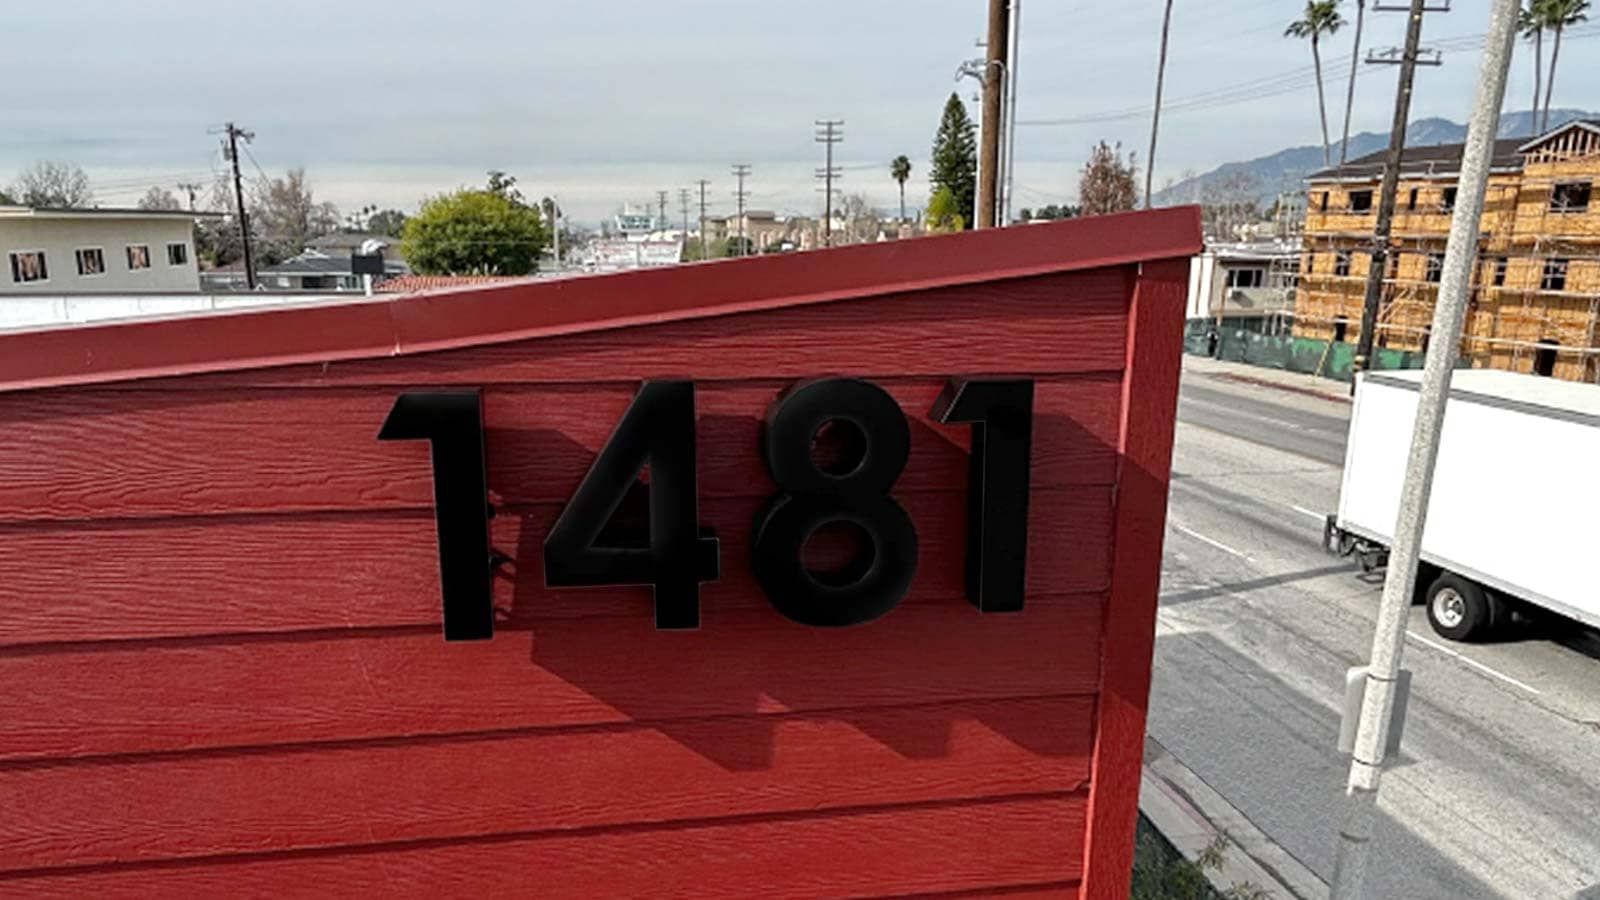 Channel letters displaying the address number